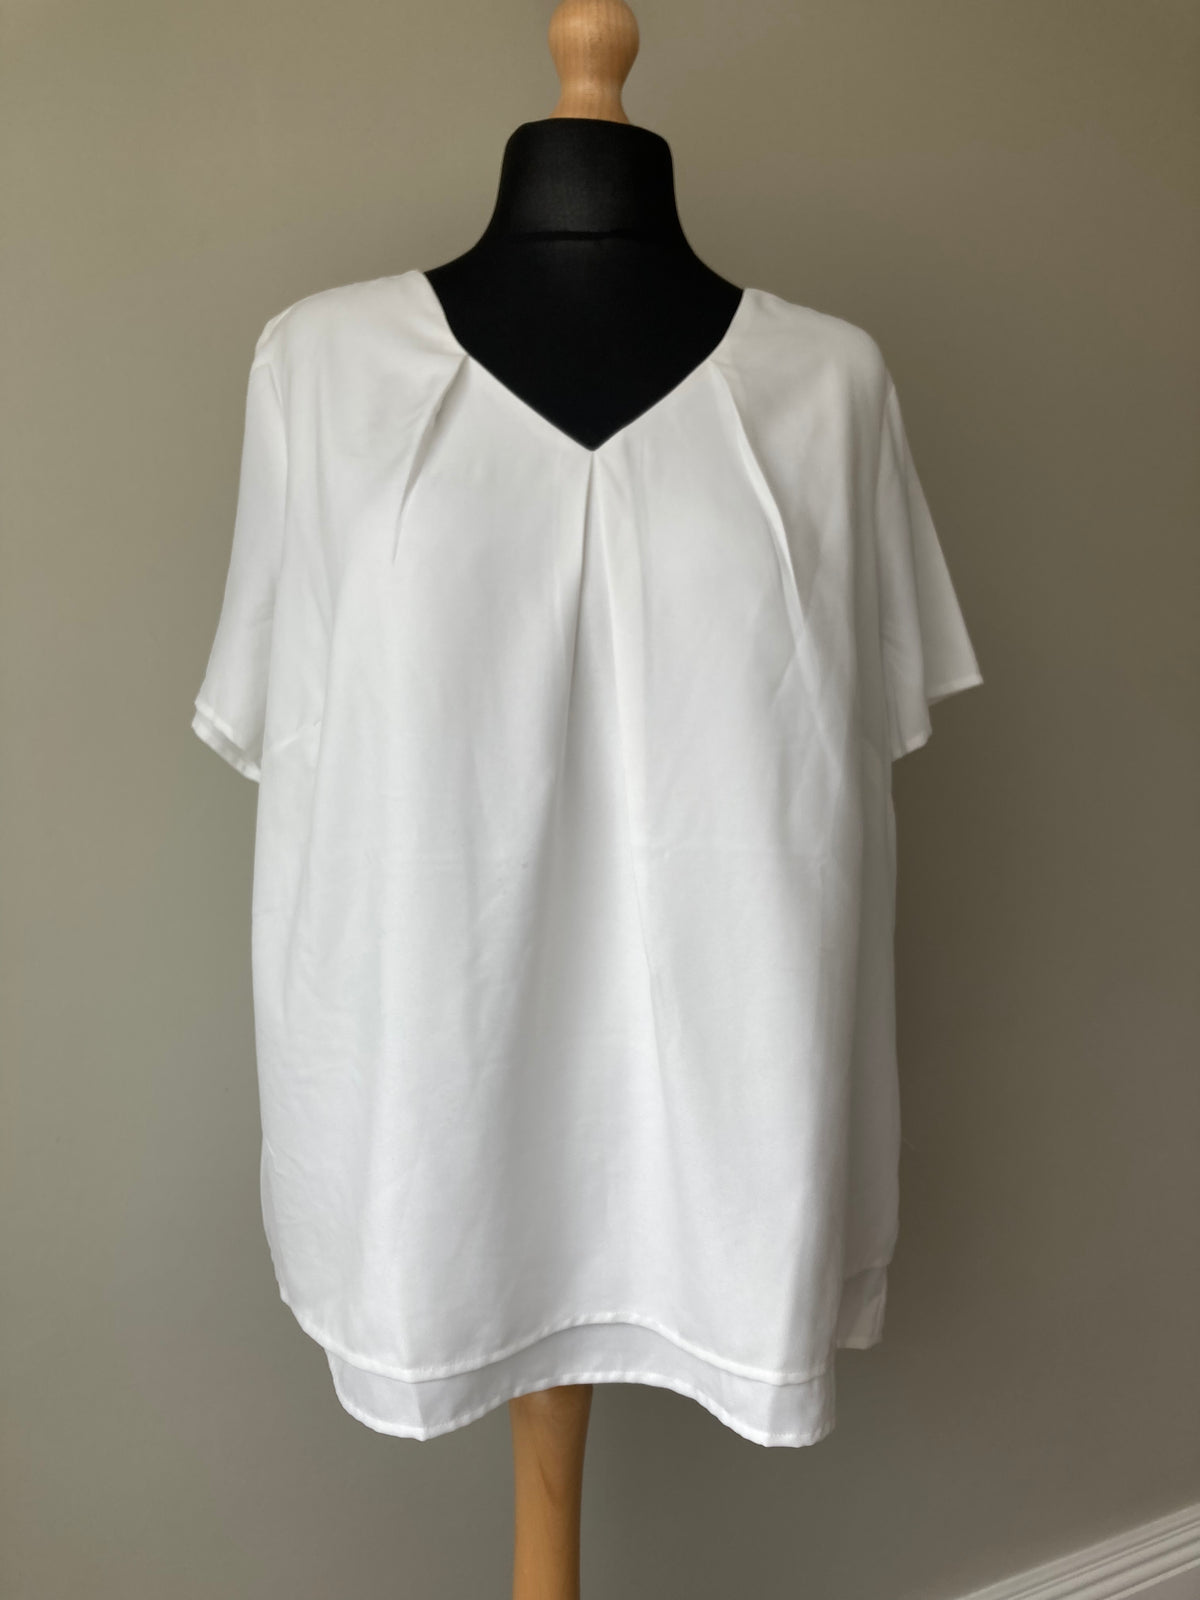 C Neck Layered Blouse by CREATION - Size 24 & 22